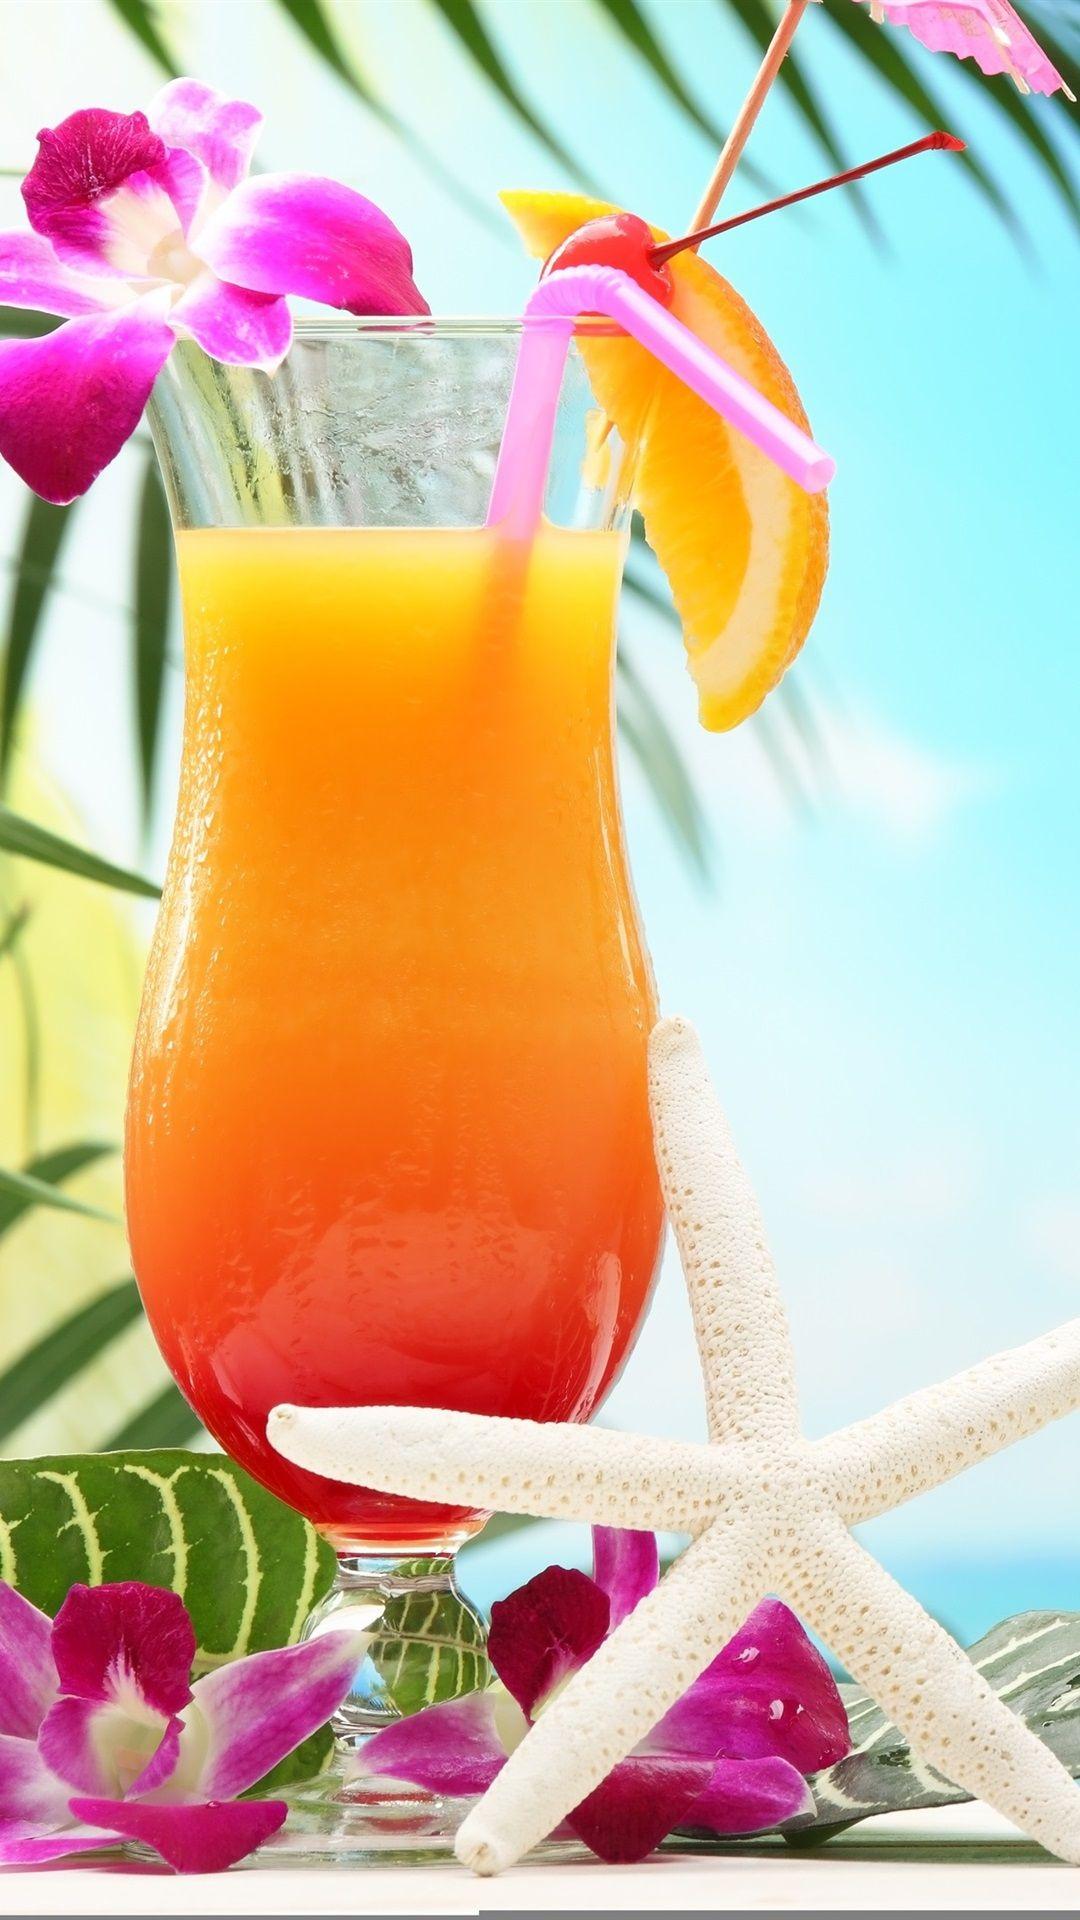 Tropical drinks, fruit juice, flowers, glass cup 1080x1920 iPhone